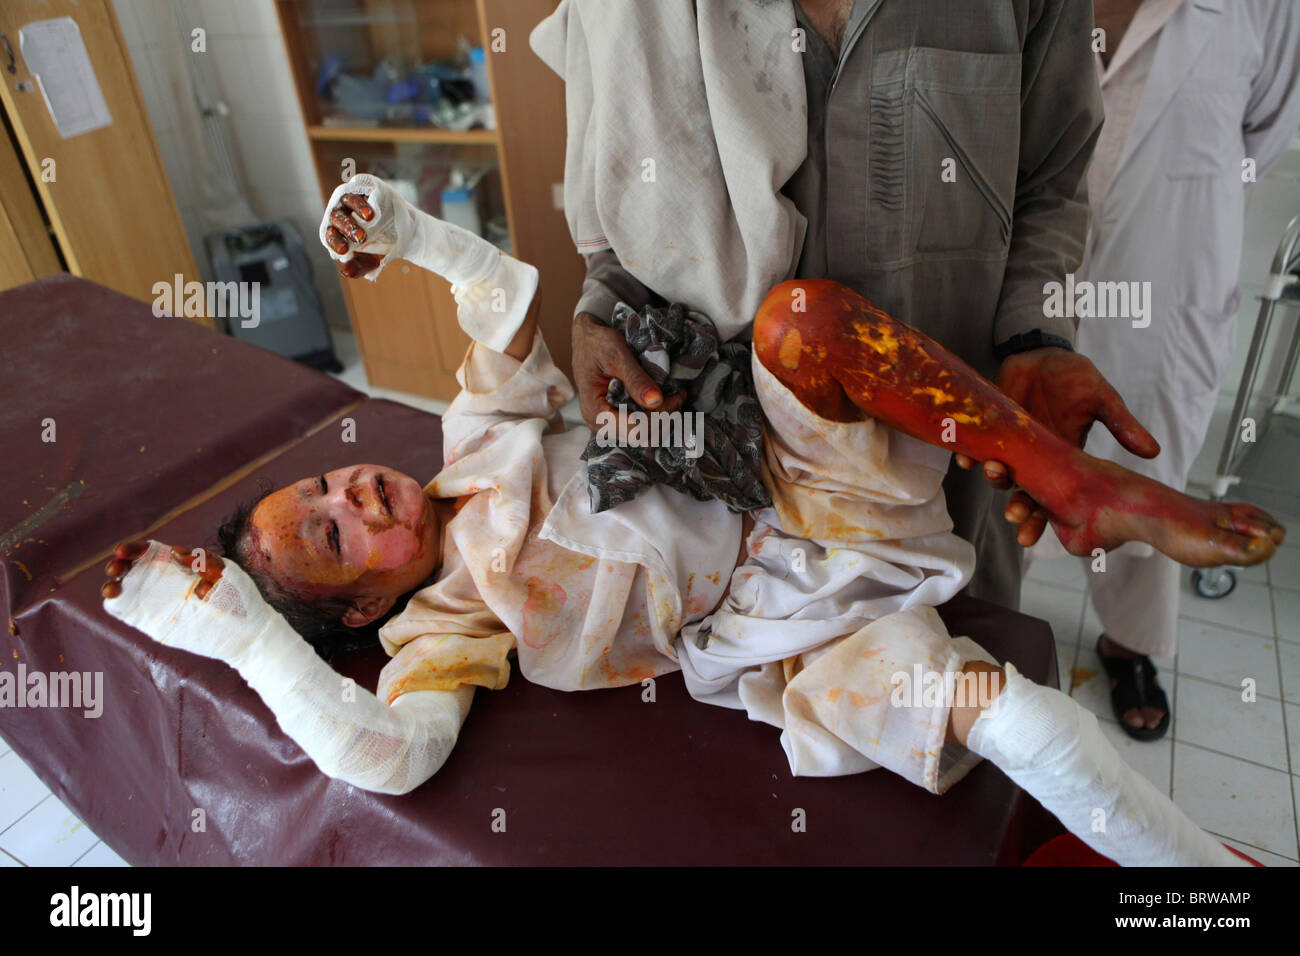 burn victims of a IED attack in Afghanistan Stock Photo